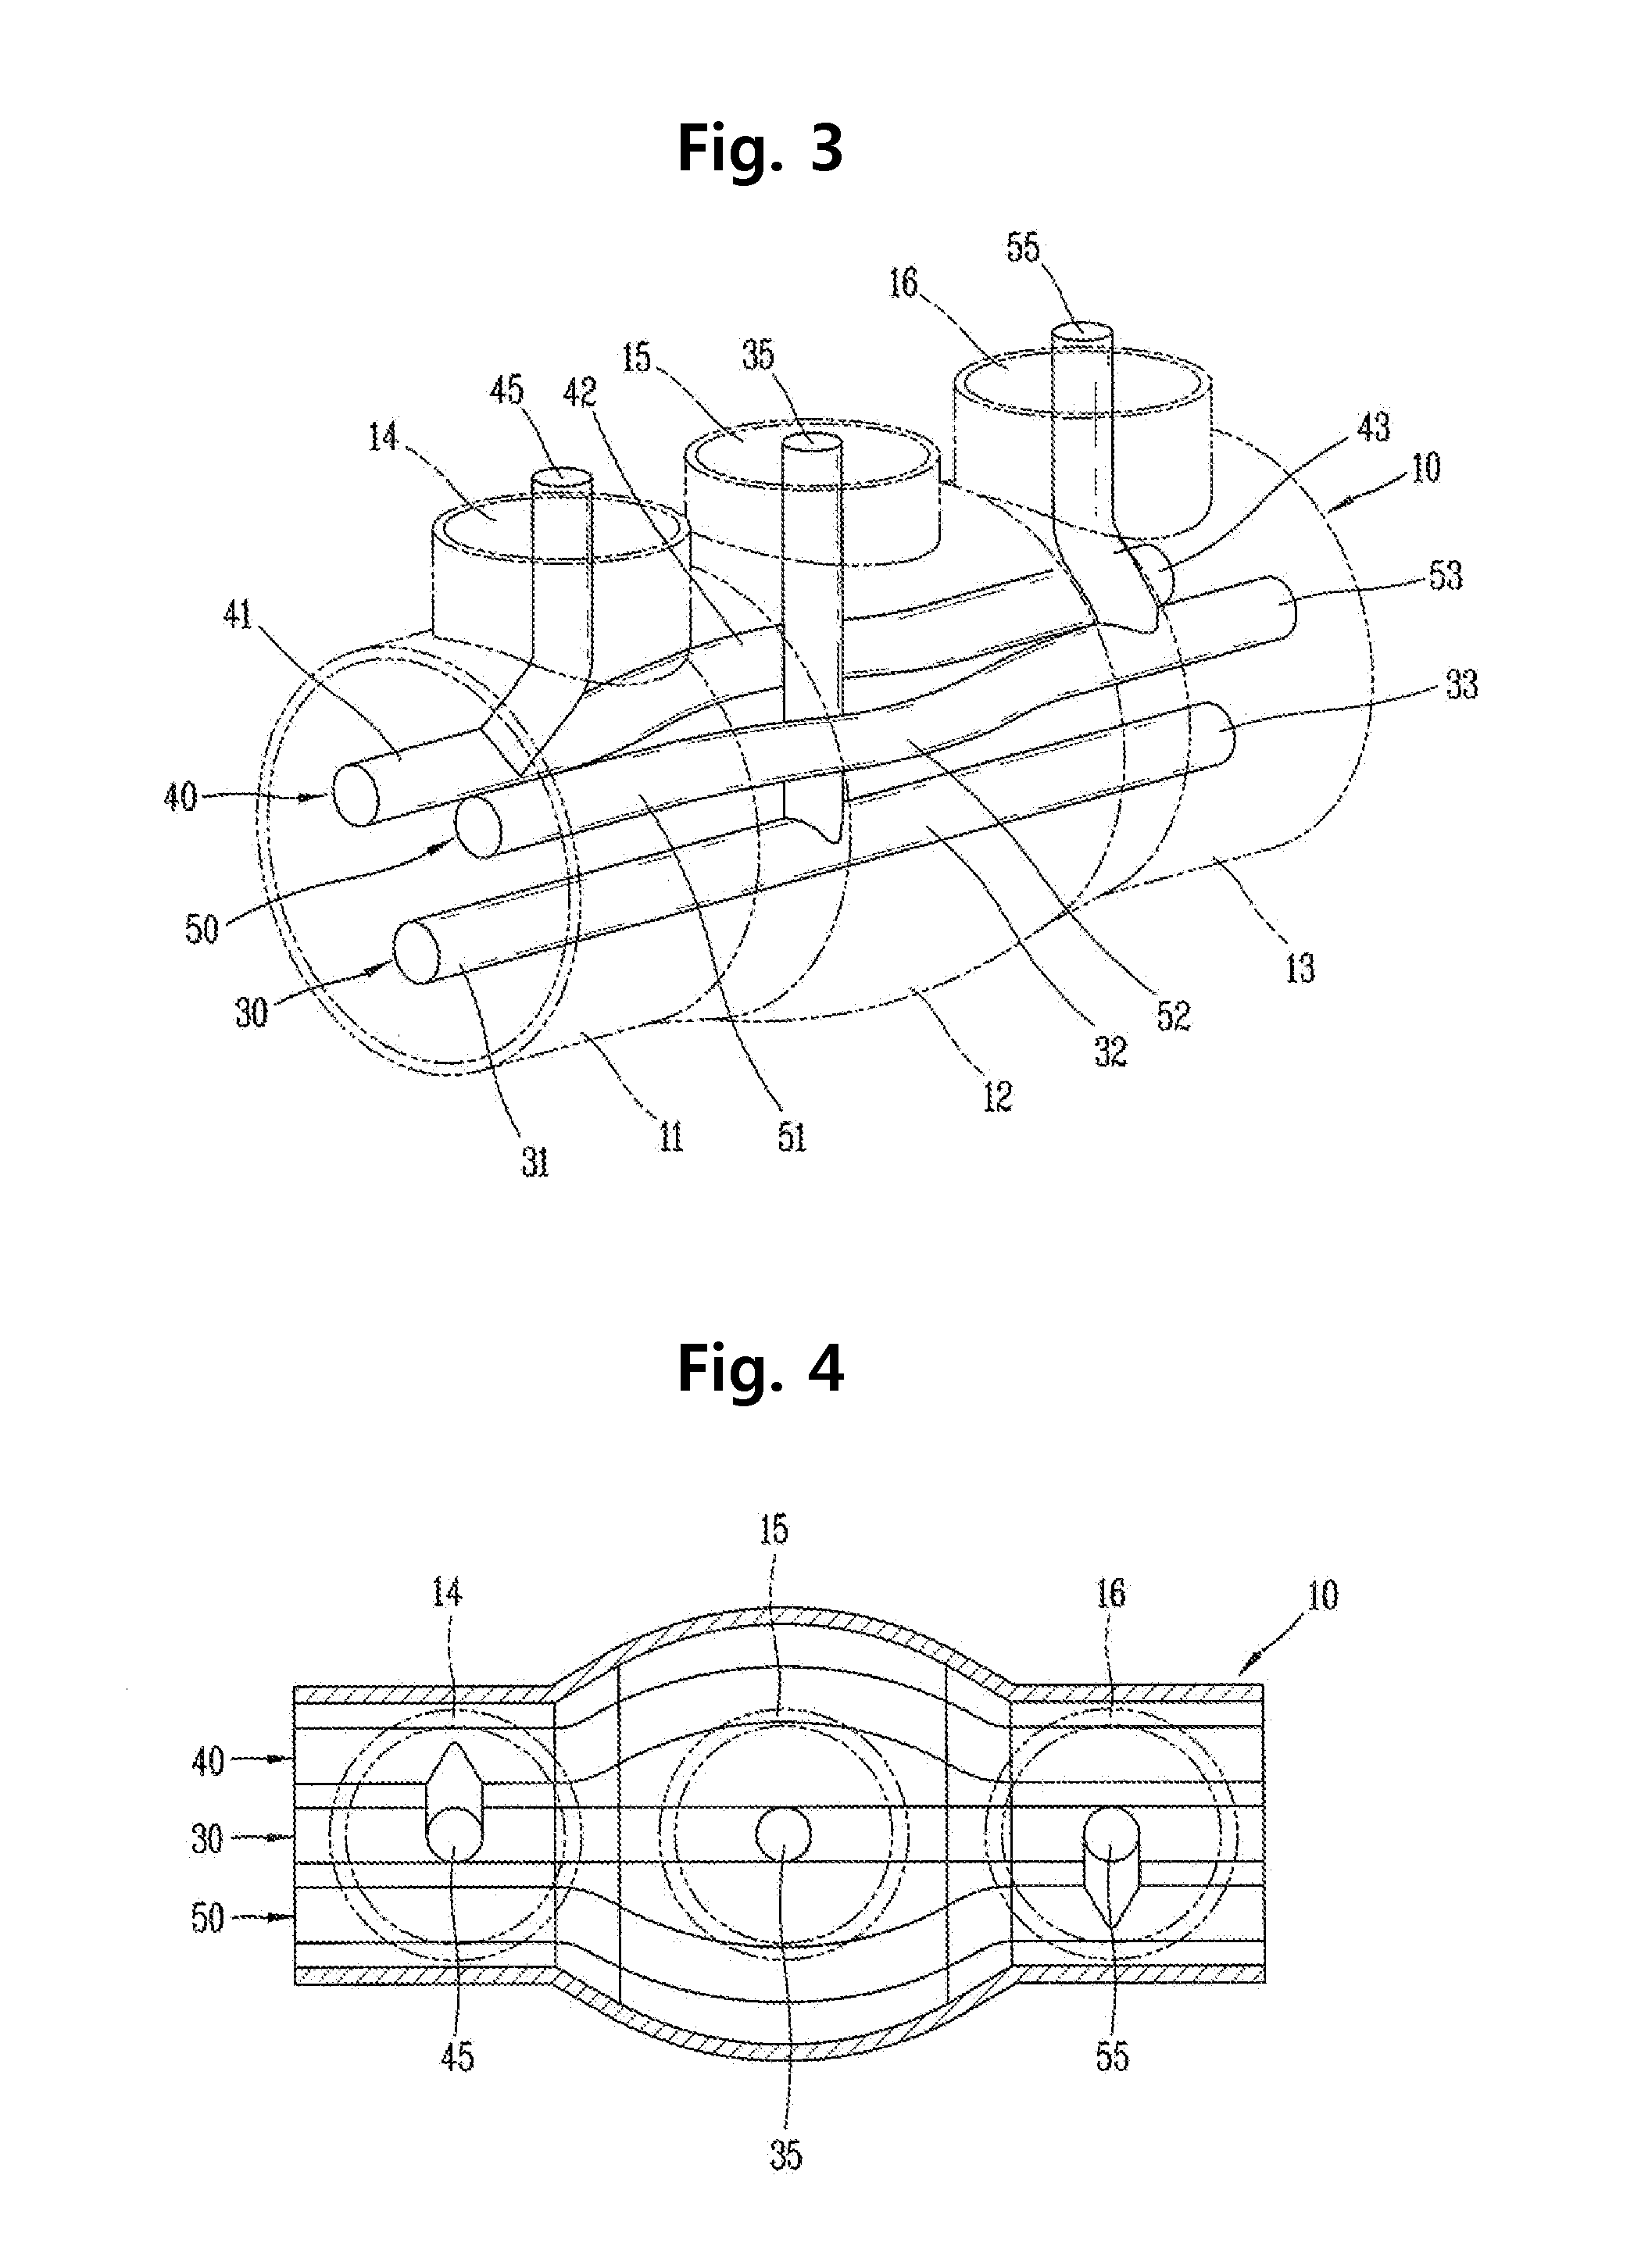 Structure of three-phase integrated bus in gas insulated switchgear